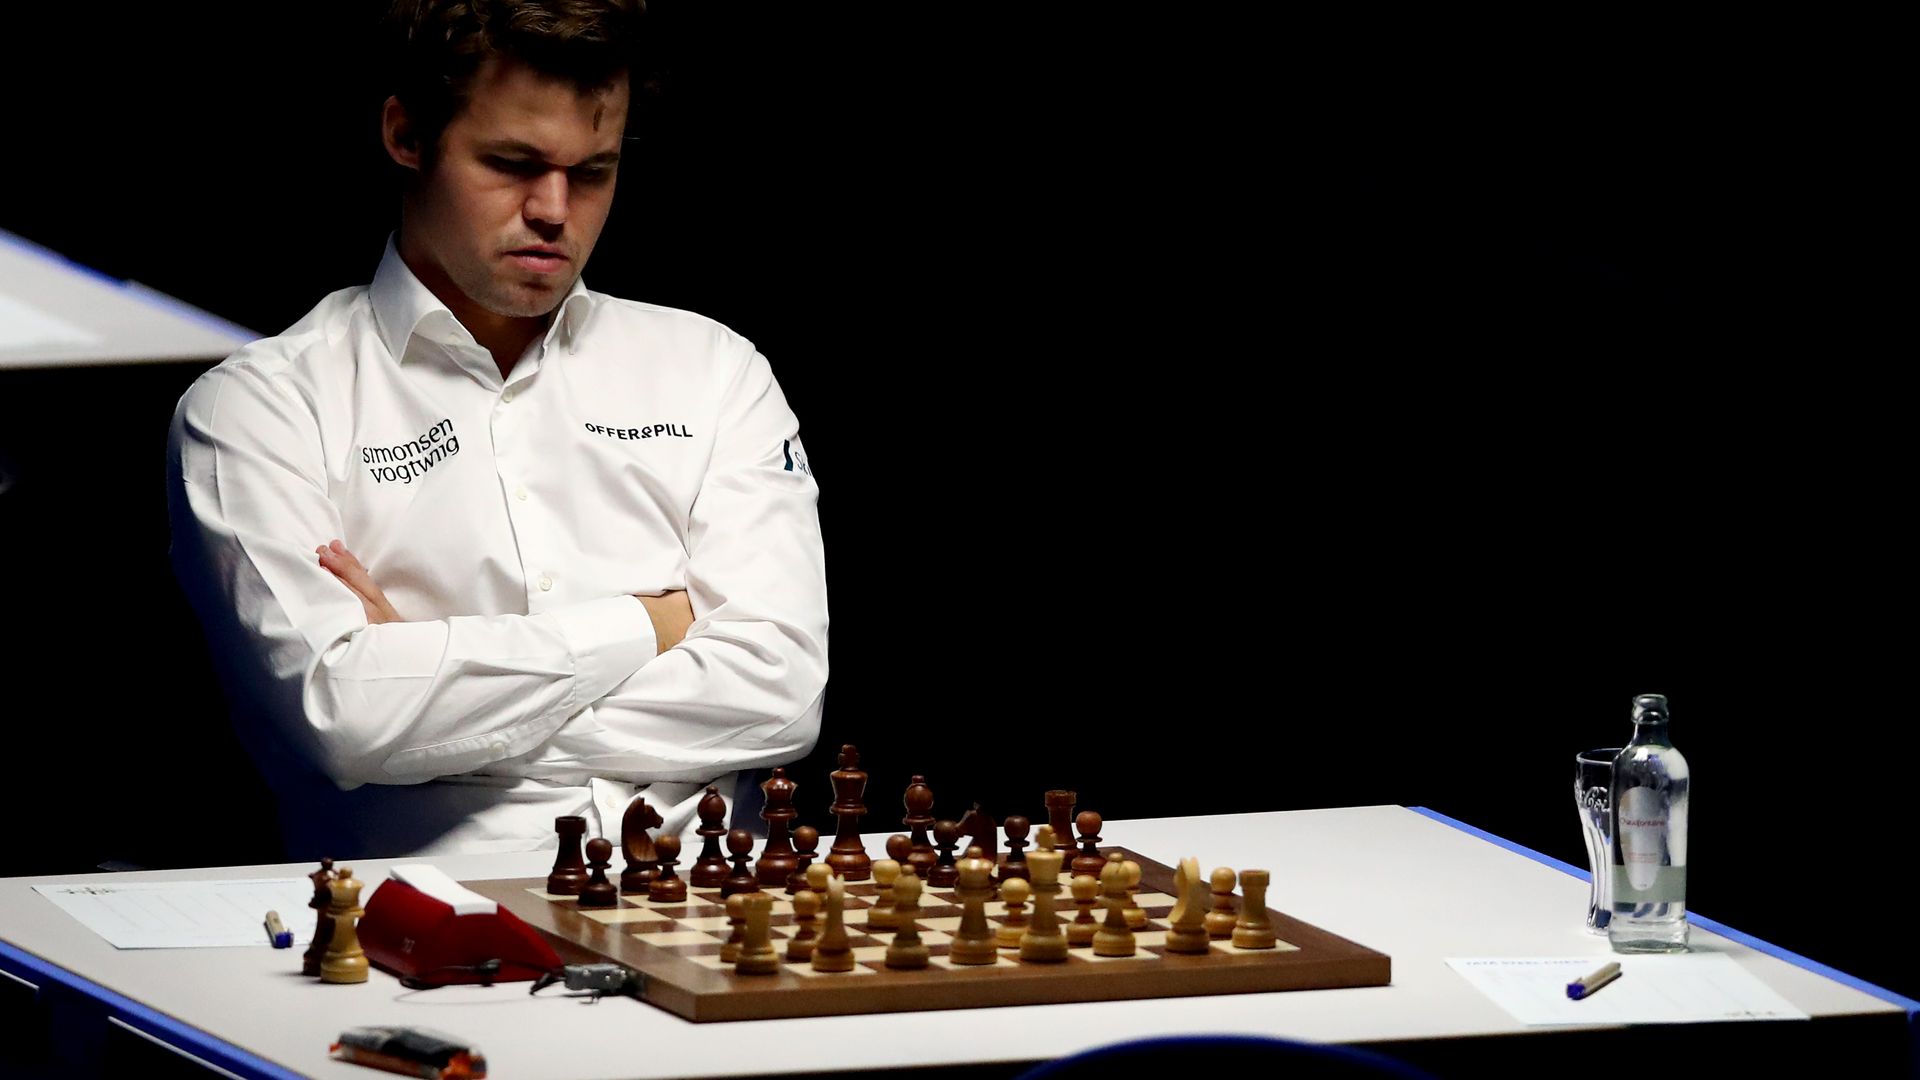 Chess champion Magnus Carlsen folds his arms across his chess as he contemplates his next move.